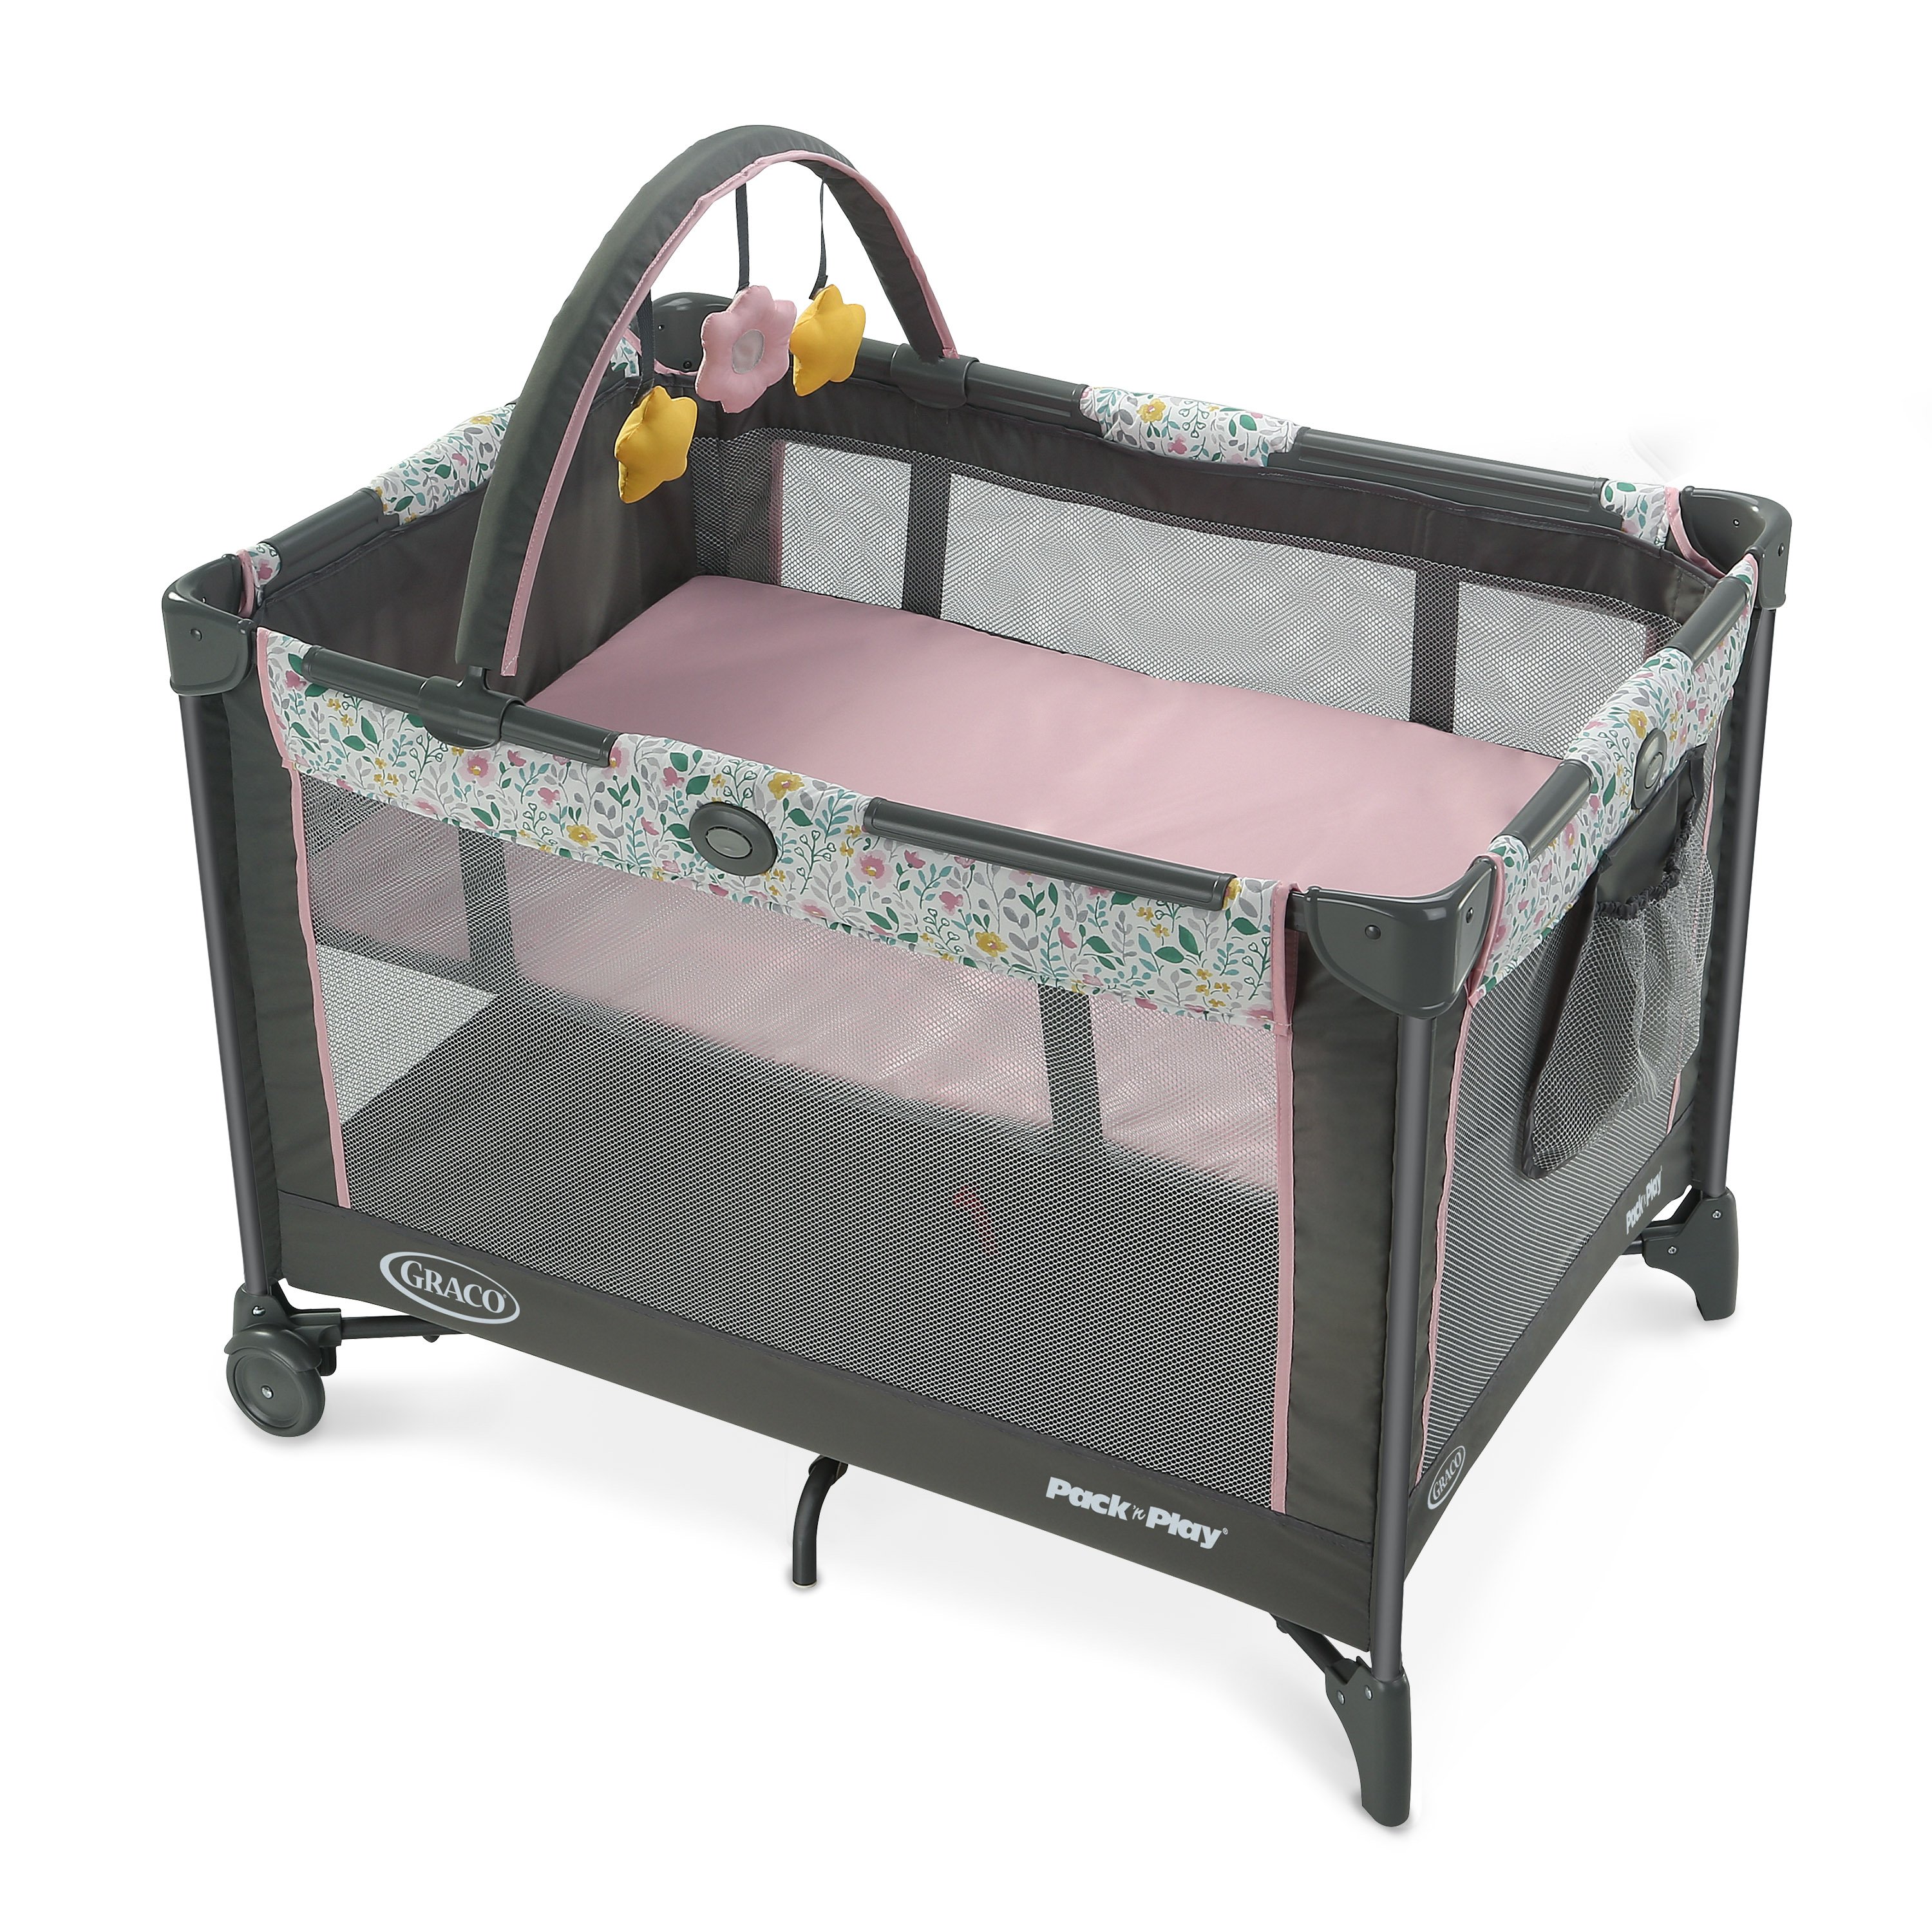 Folding Portable Playpen Baby Play Yard Travel Bag In/Outdoor Safety 